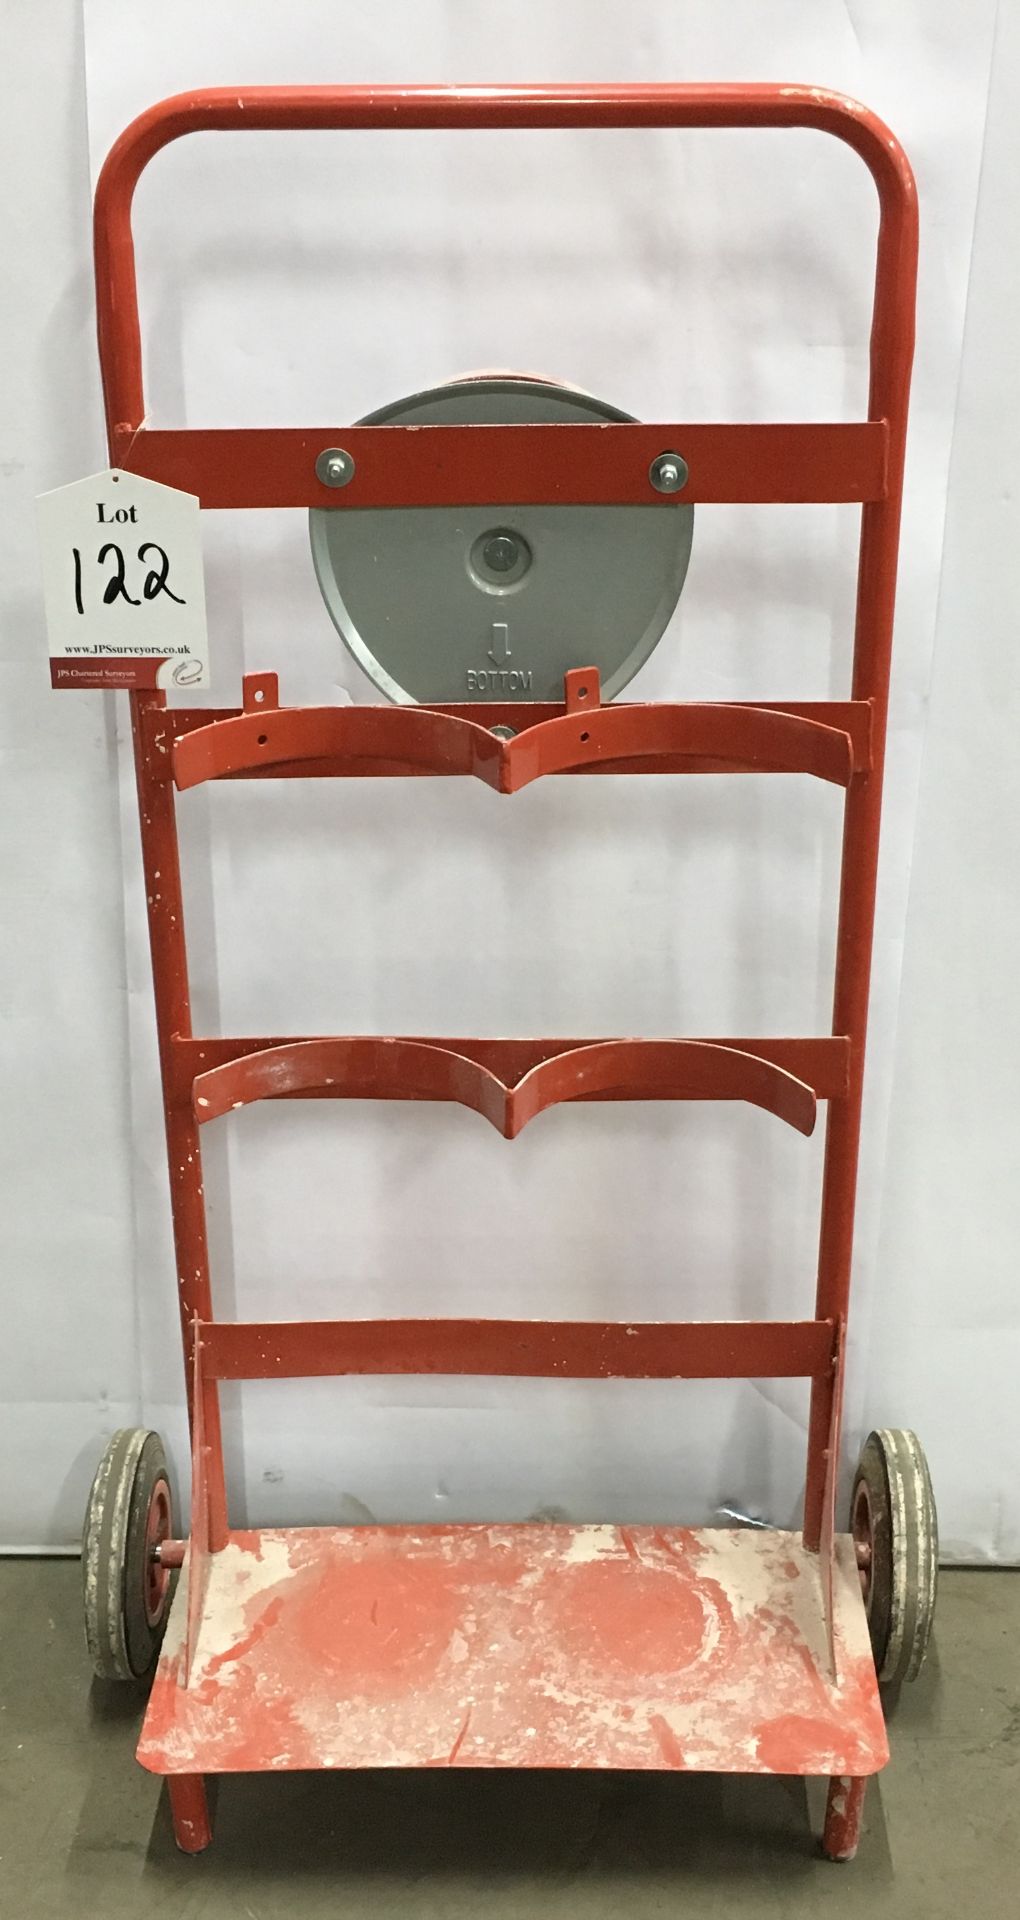 Fire Exit Trolley includes Fire Bell